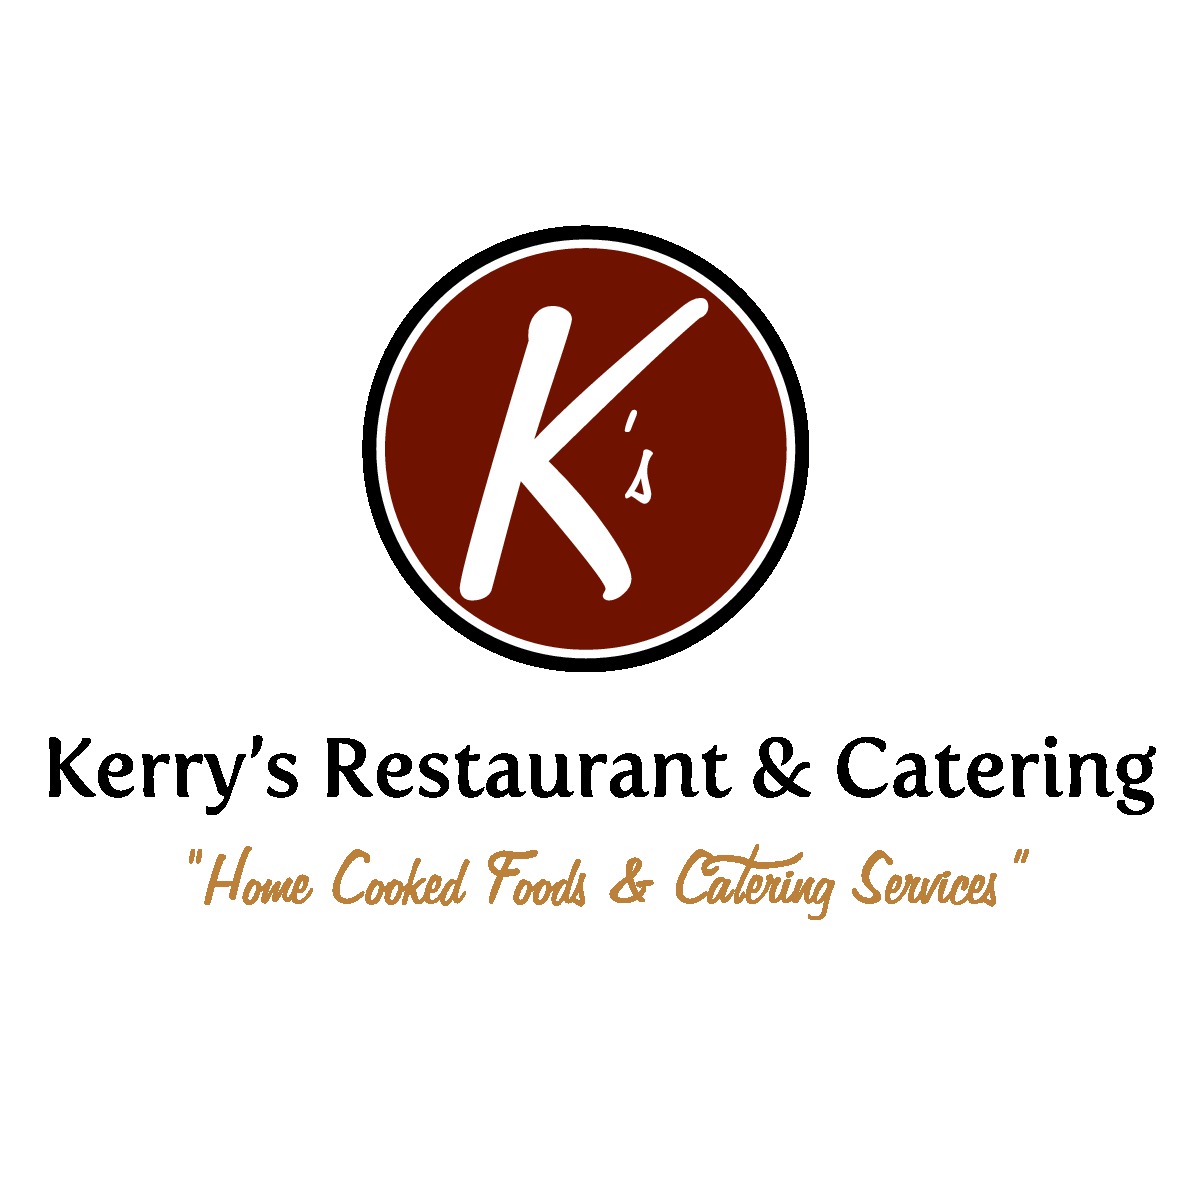 Kerry's Restaurant & Catering, Inc's Logo